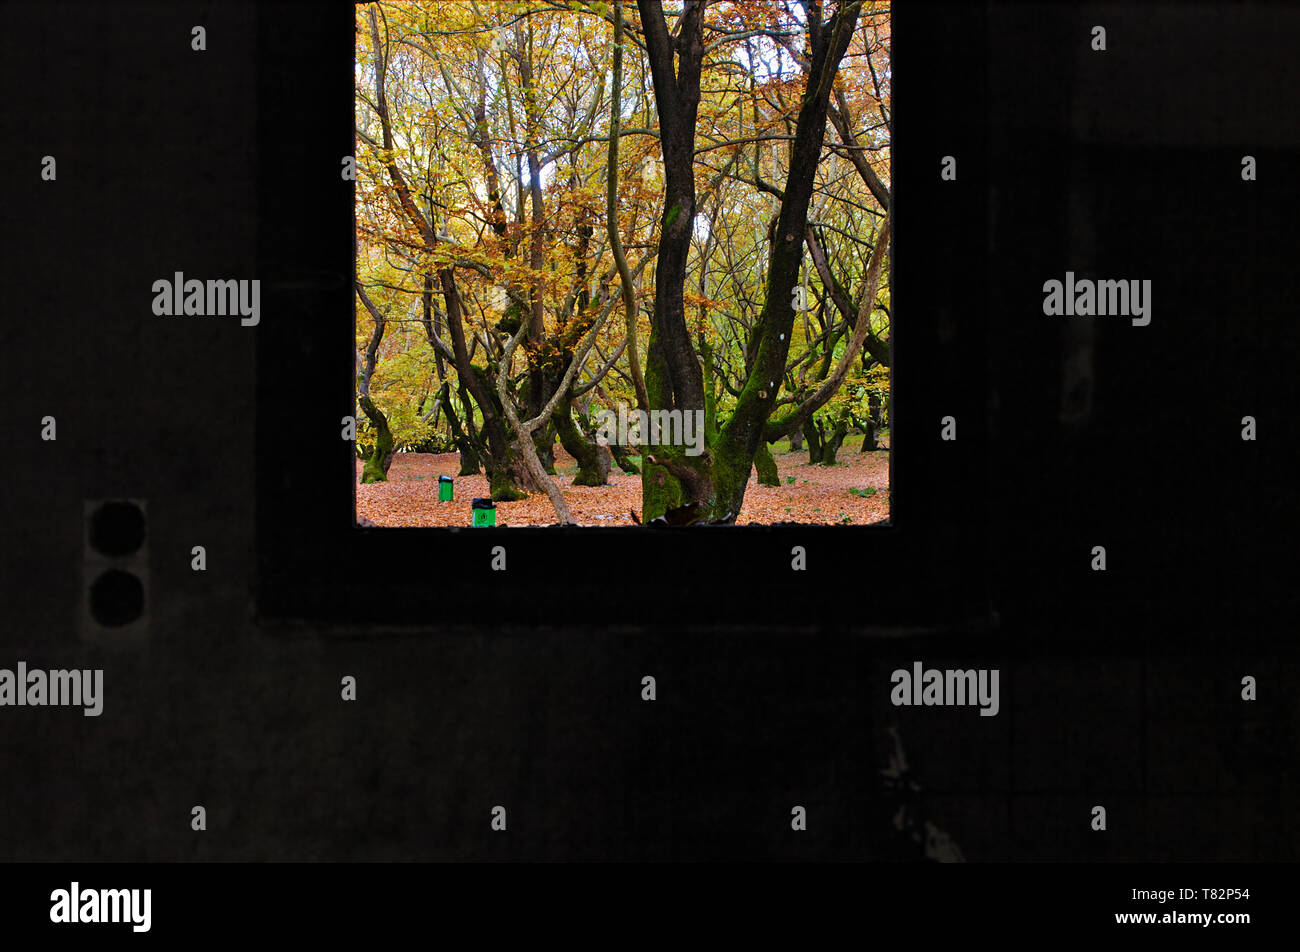 Beautiful autumn view from abandoned building window. Vibrant landscape nature colors, contrasts with pale dark building interior. Sycamore plane tree Stock Photo